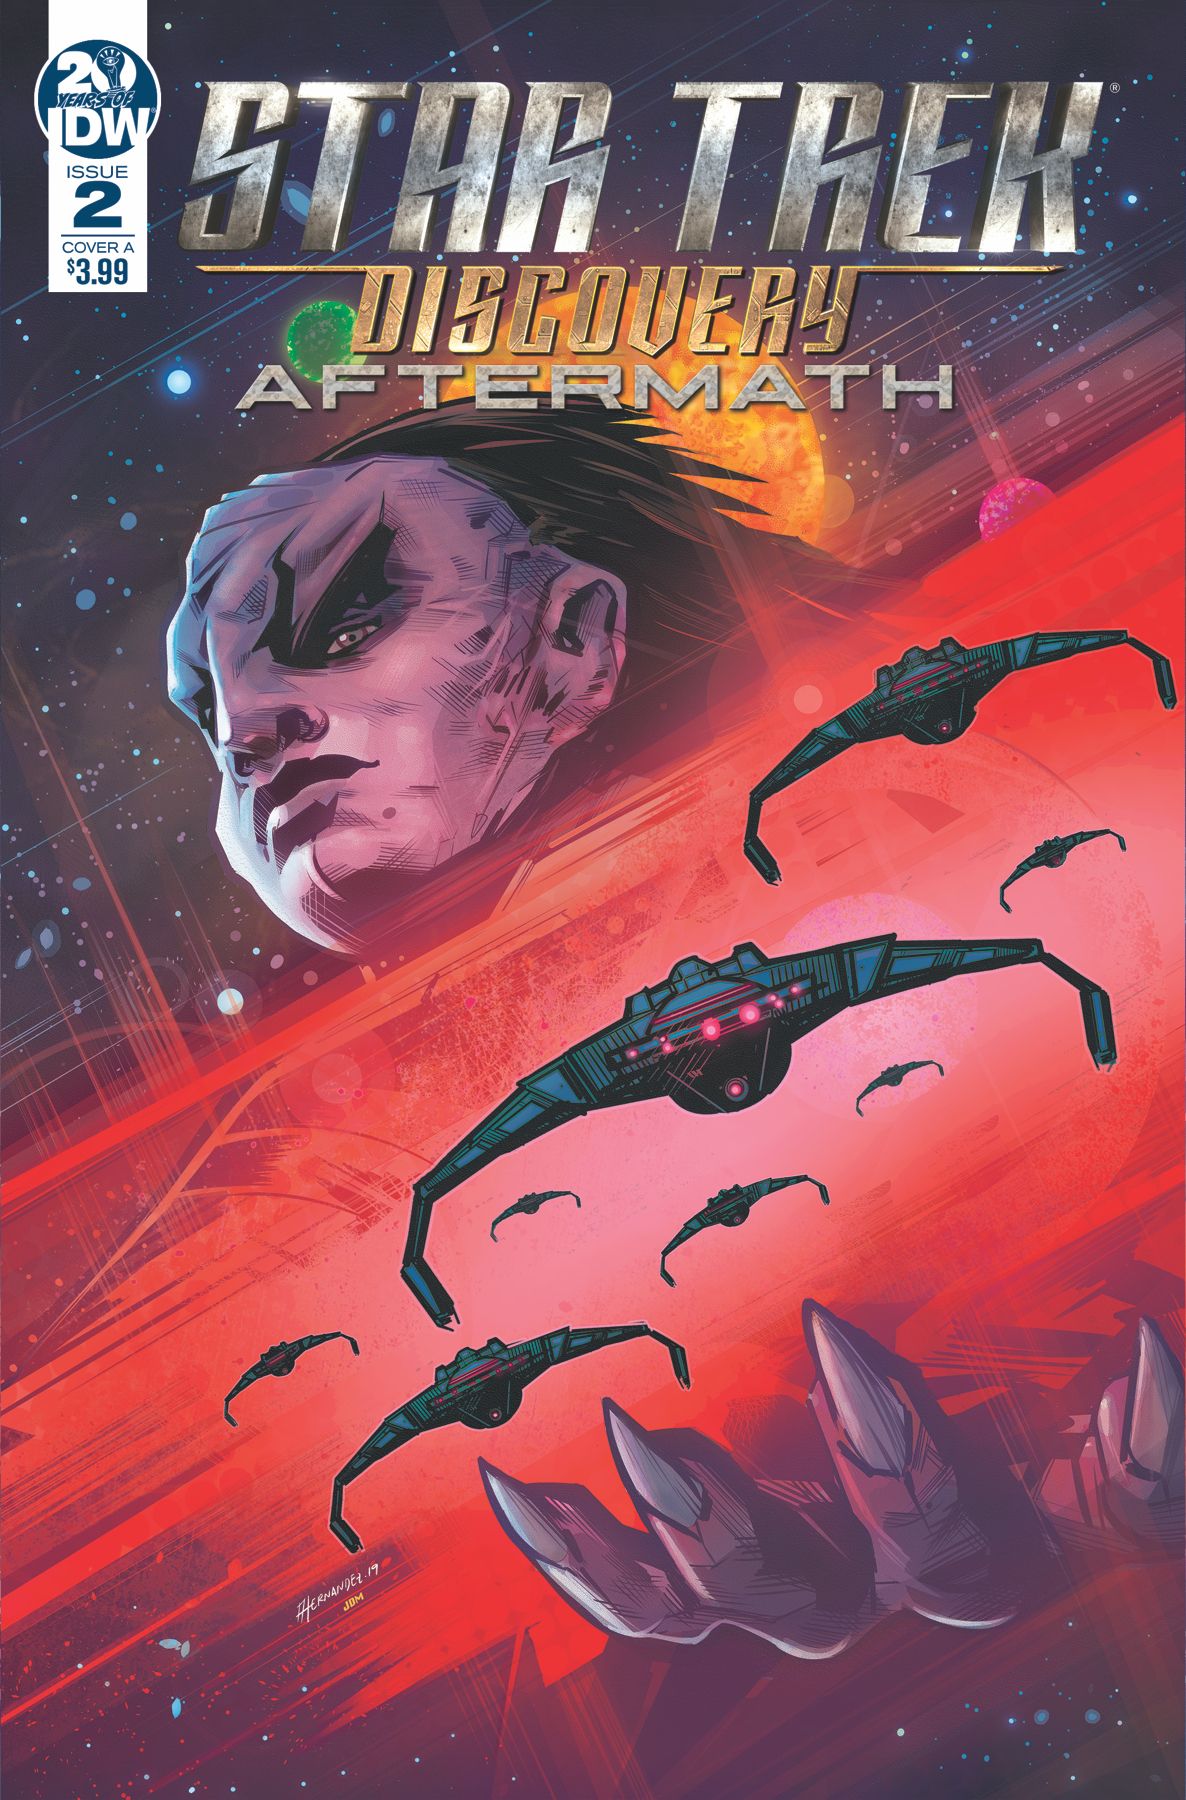 Star Trek: Discovery - Aftermath #2 Comic